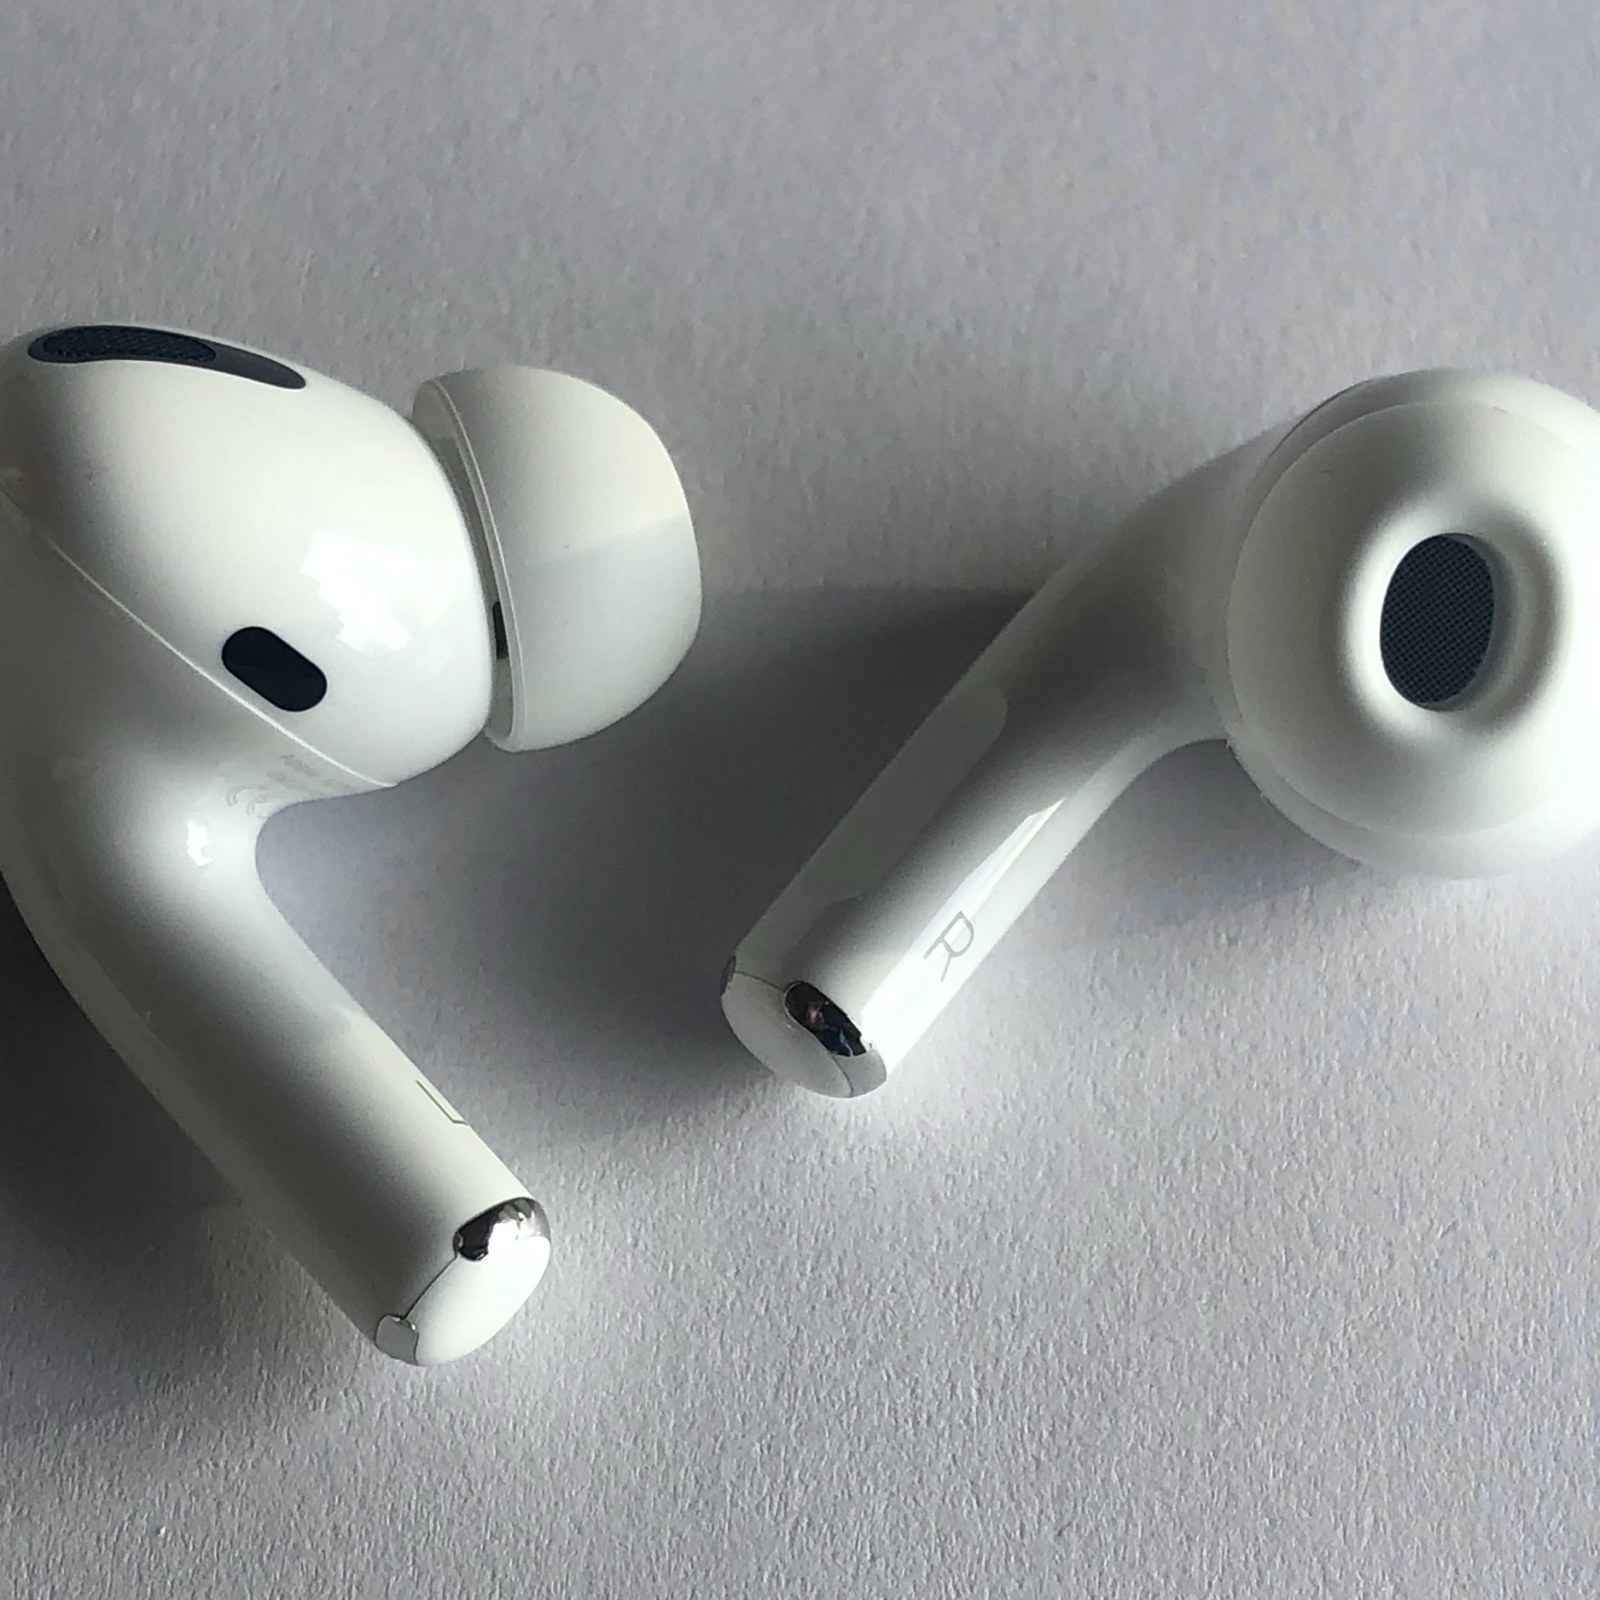 How to change settings on AirPods